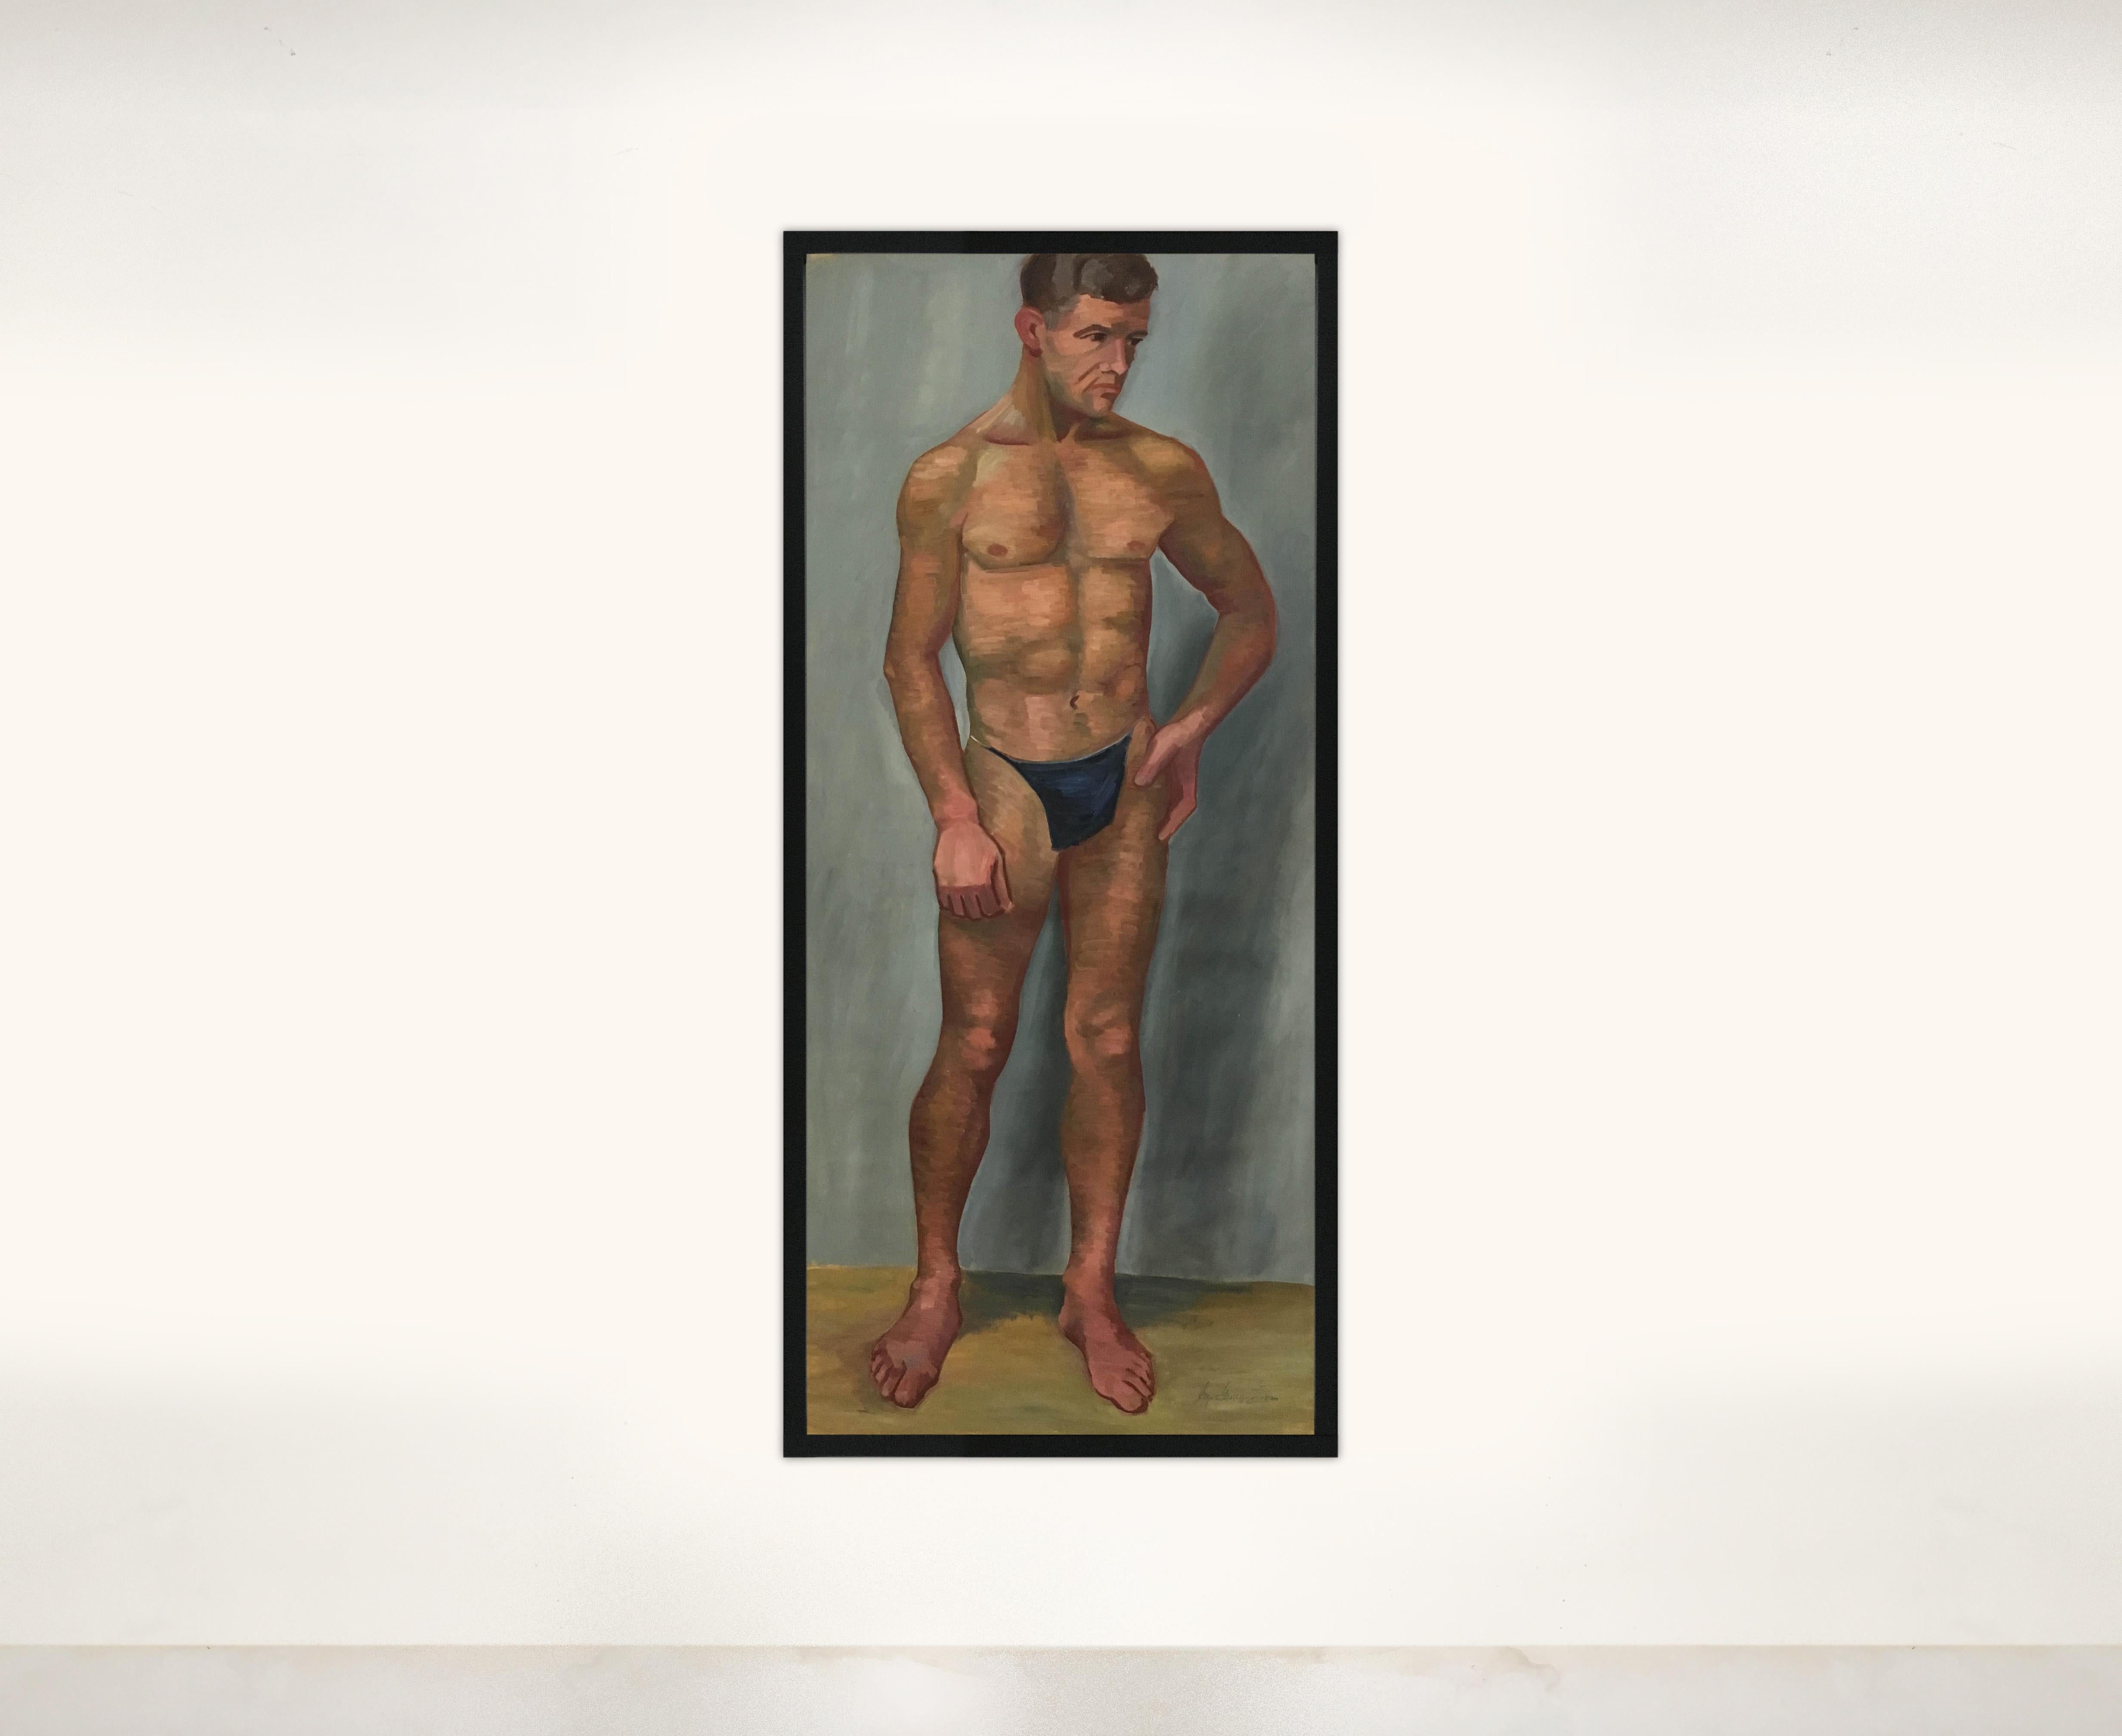 Exquisite 1933 Art Deco male men nude portrait oil painting by Austrian artist, Olga von Mossig-Zupan (1900-1992). The oil painting is on unstretched canvas and depicts the study of an nude young male signed and dated by the artist, Olga Mossig